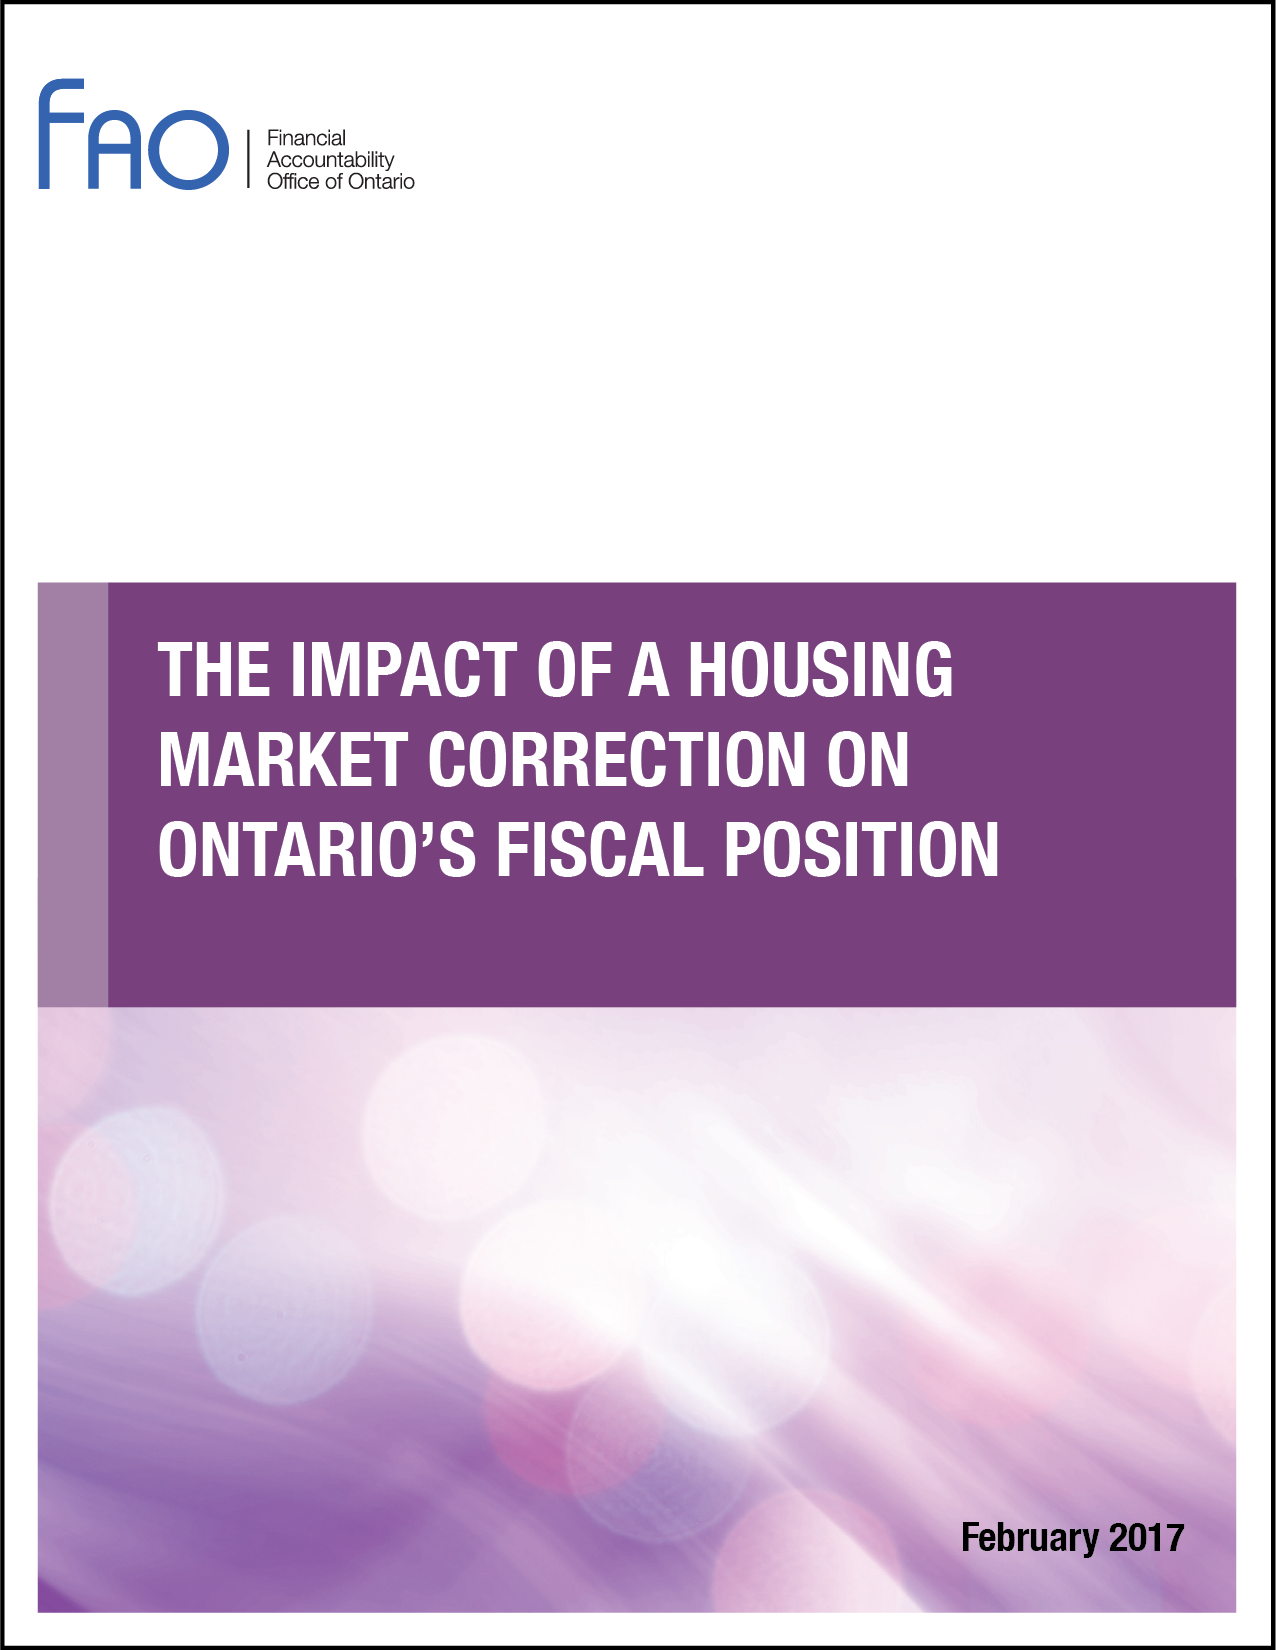 The Impact of a Housing Market Correction on Ontario’s Fiscal Position